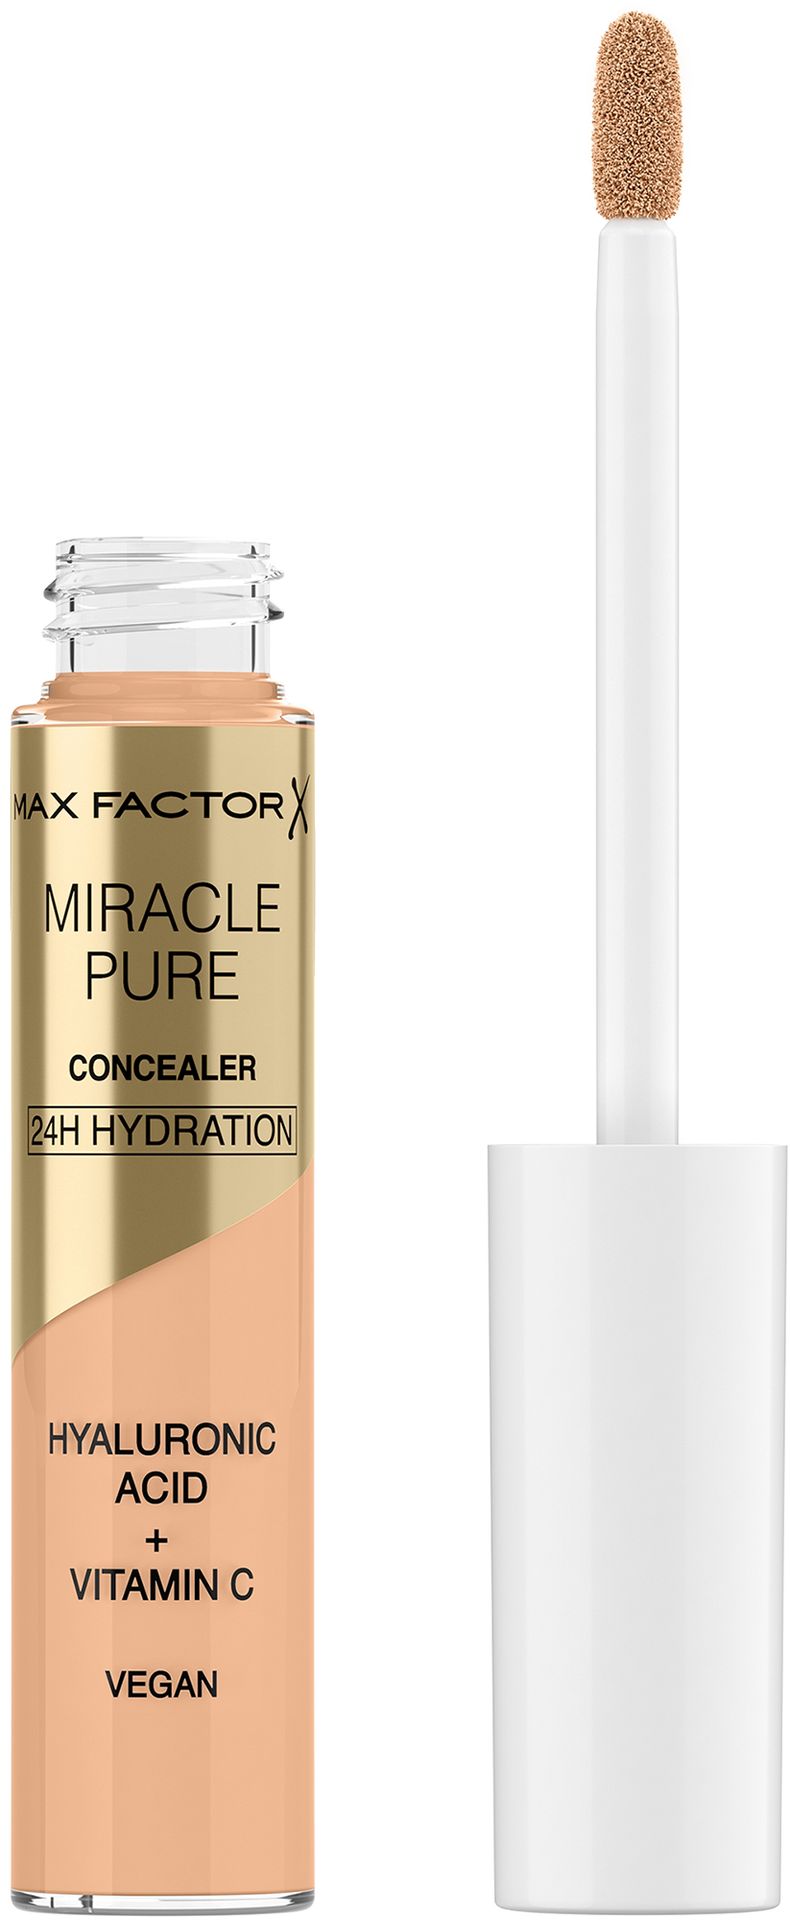 MAX FACTOR Miracle Pure Concealer 01 Fair